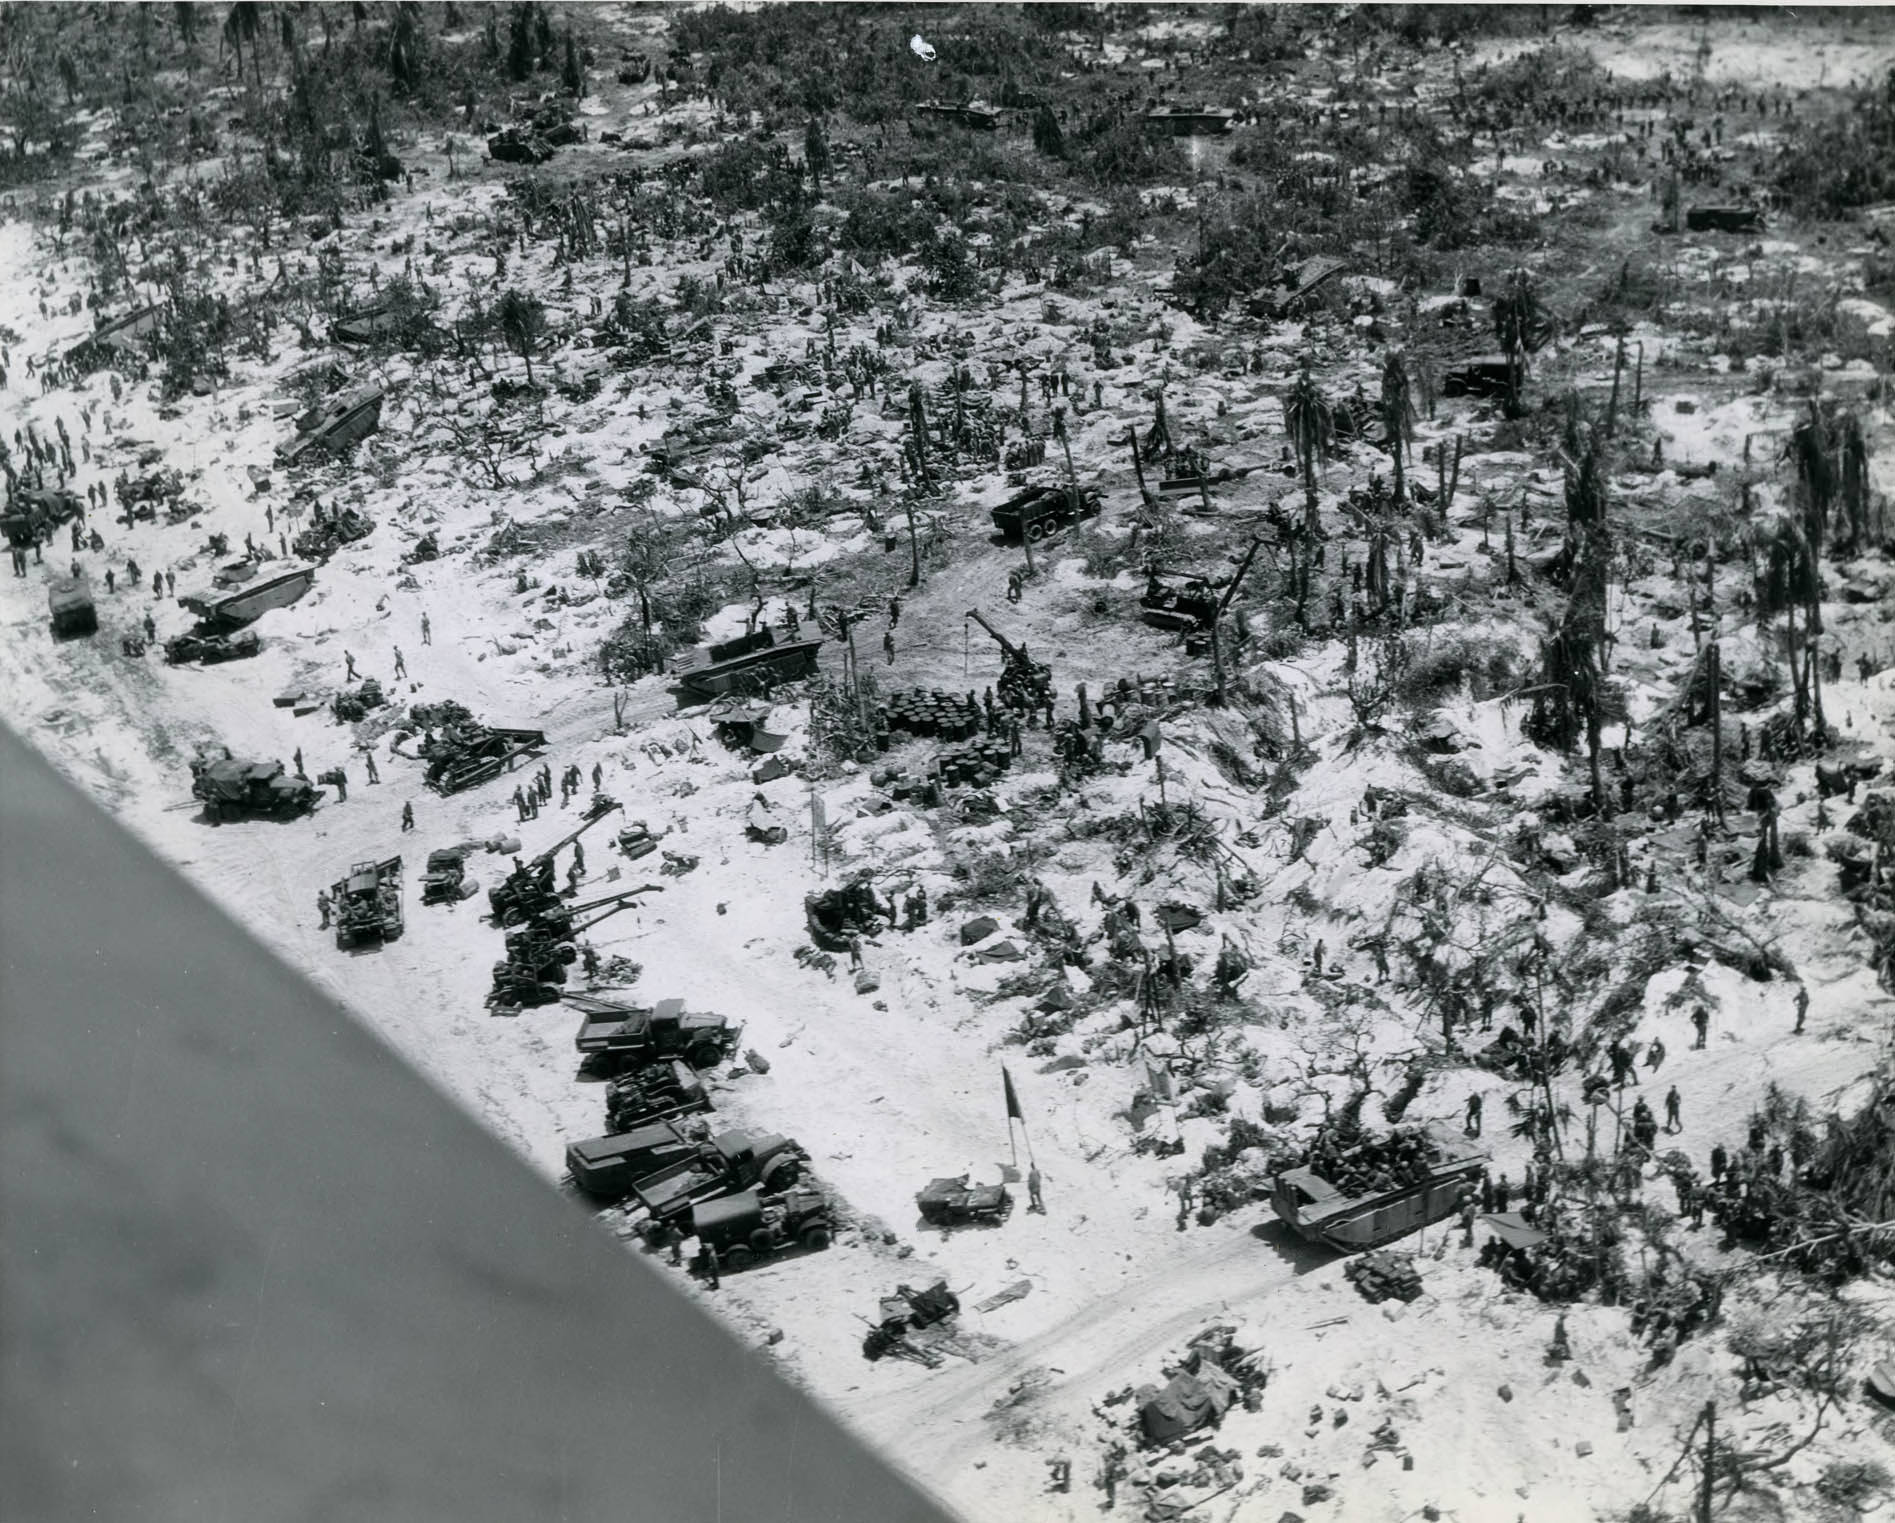 US Marines moving supplies ashore across the beachhead on Peleliu, Palau Islands, late Sep 1944. What appears to be water in the lower left is actually the wing of the photo plane.